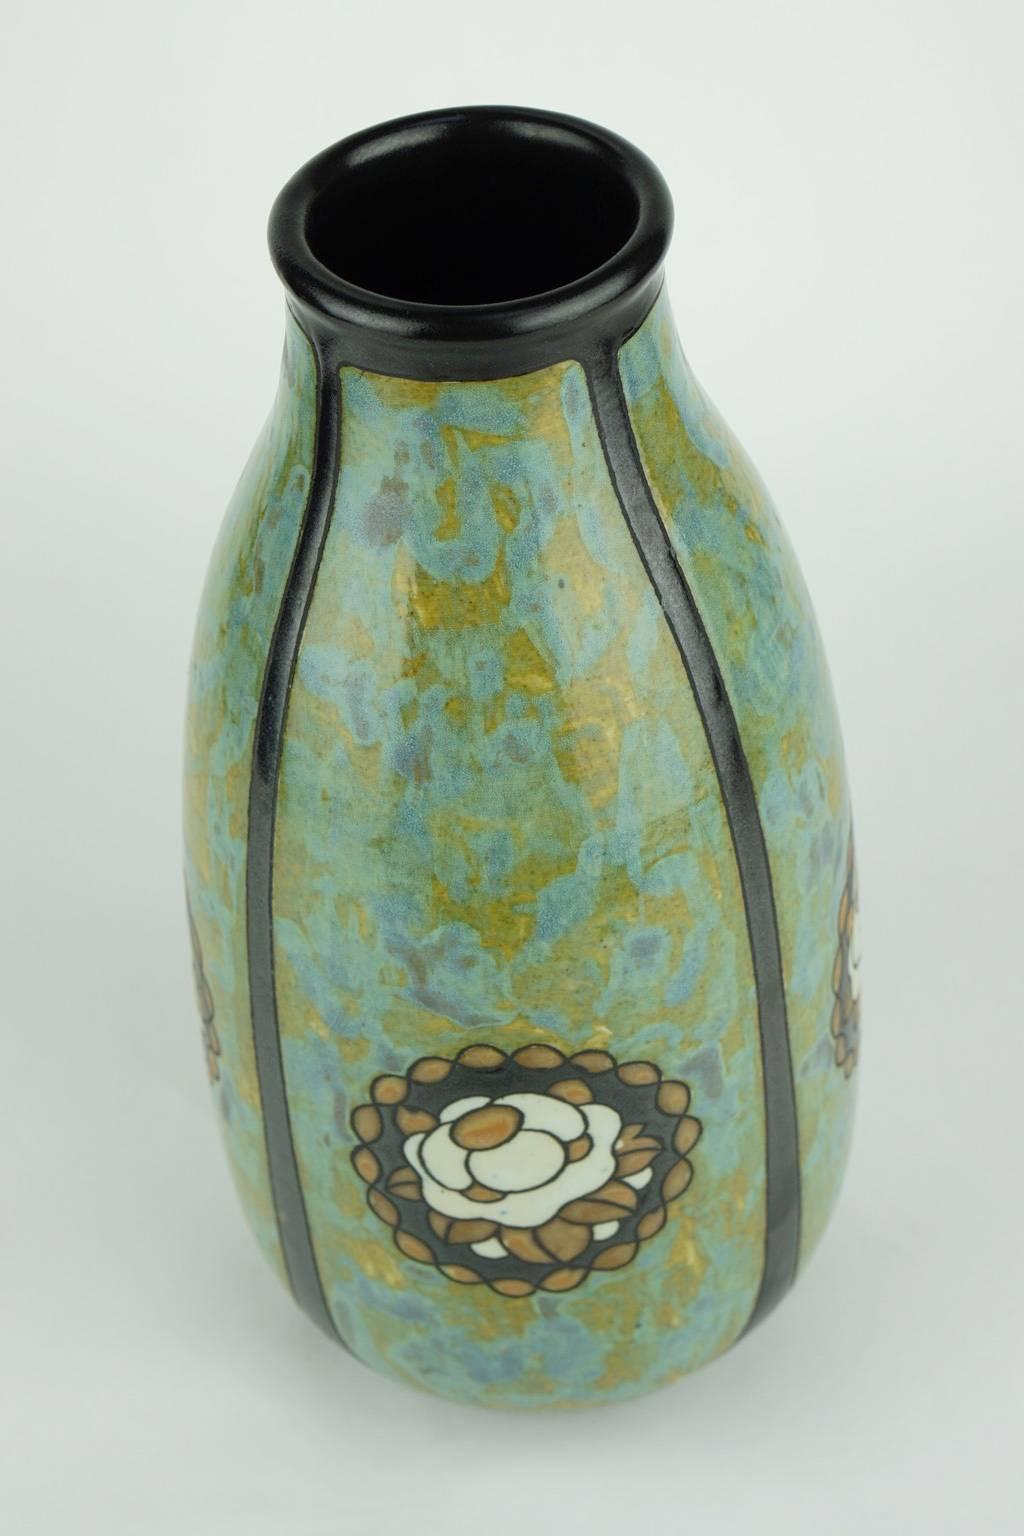 Matte stoneware Art Deco vase signed Ch. Catteau. Design 771. The design is made of floral medallions on marbled background each in one of four quartets. (Form 396).

Size: H 27 cm, diameter base 9 cm, diameter top 6 cm.